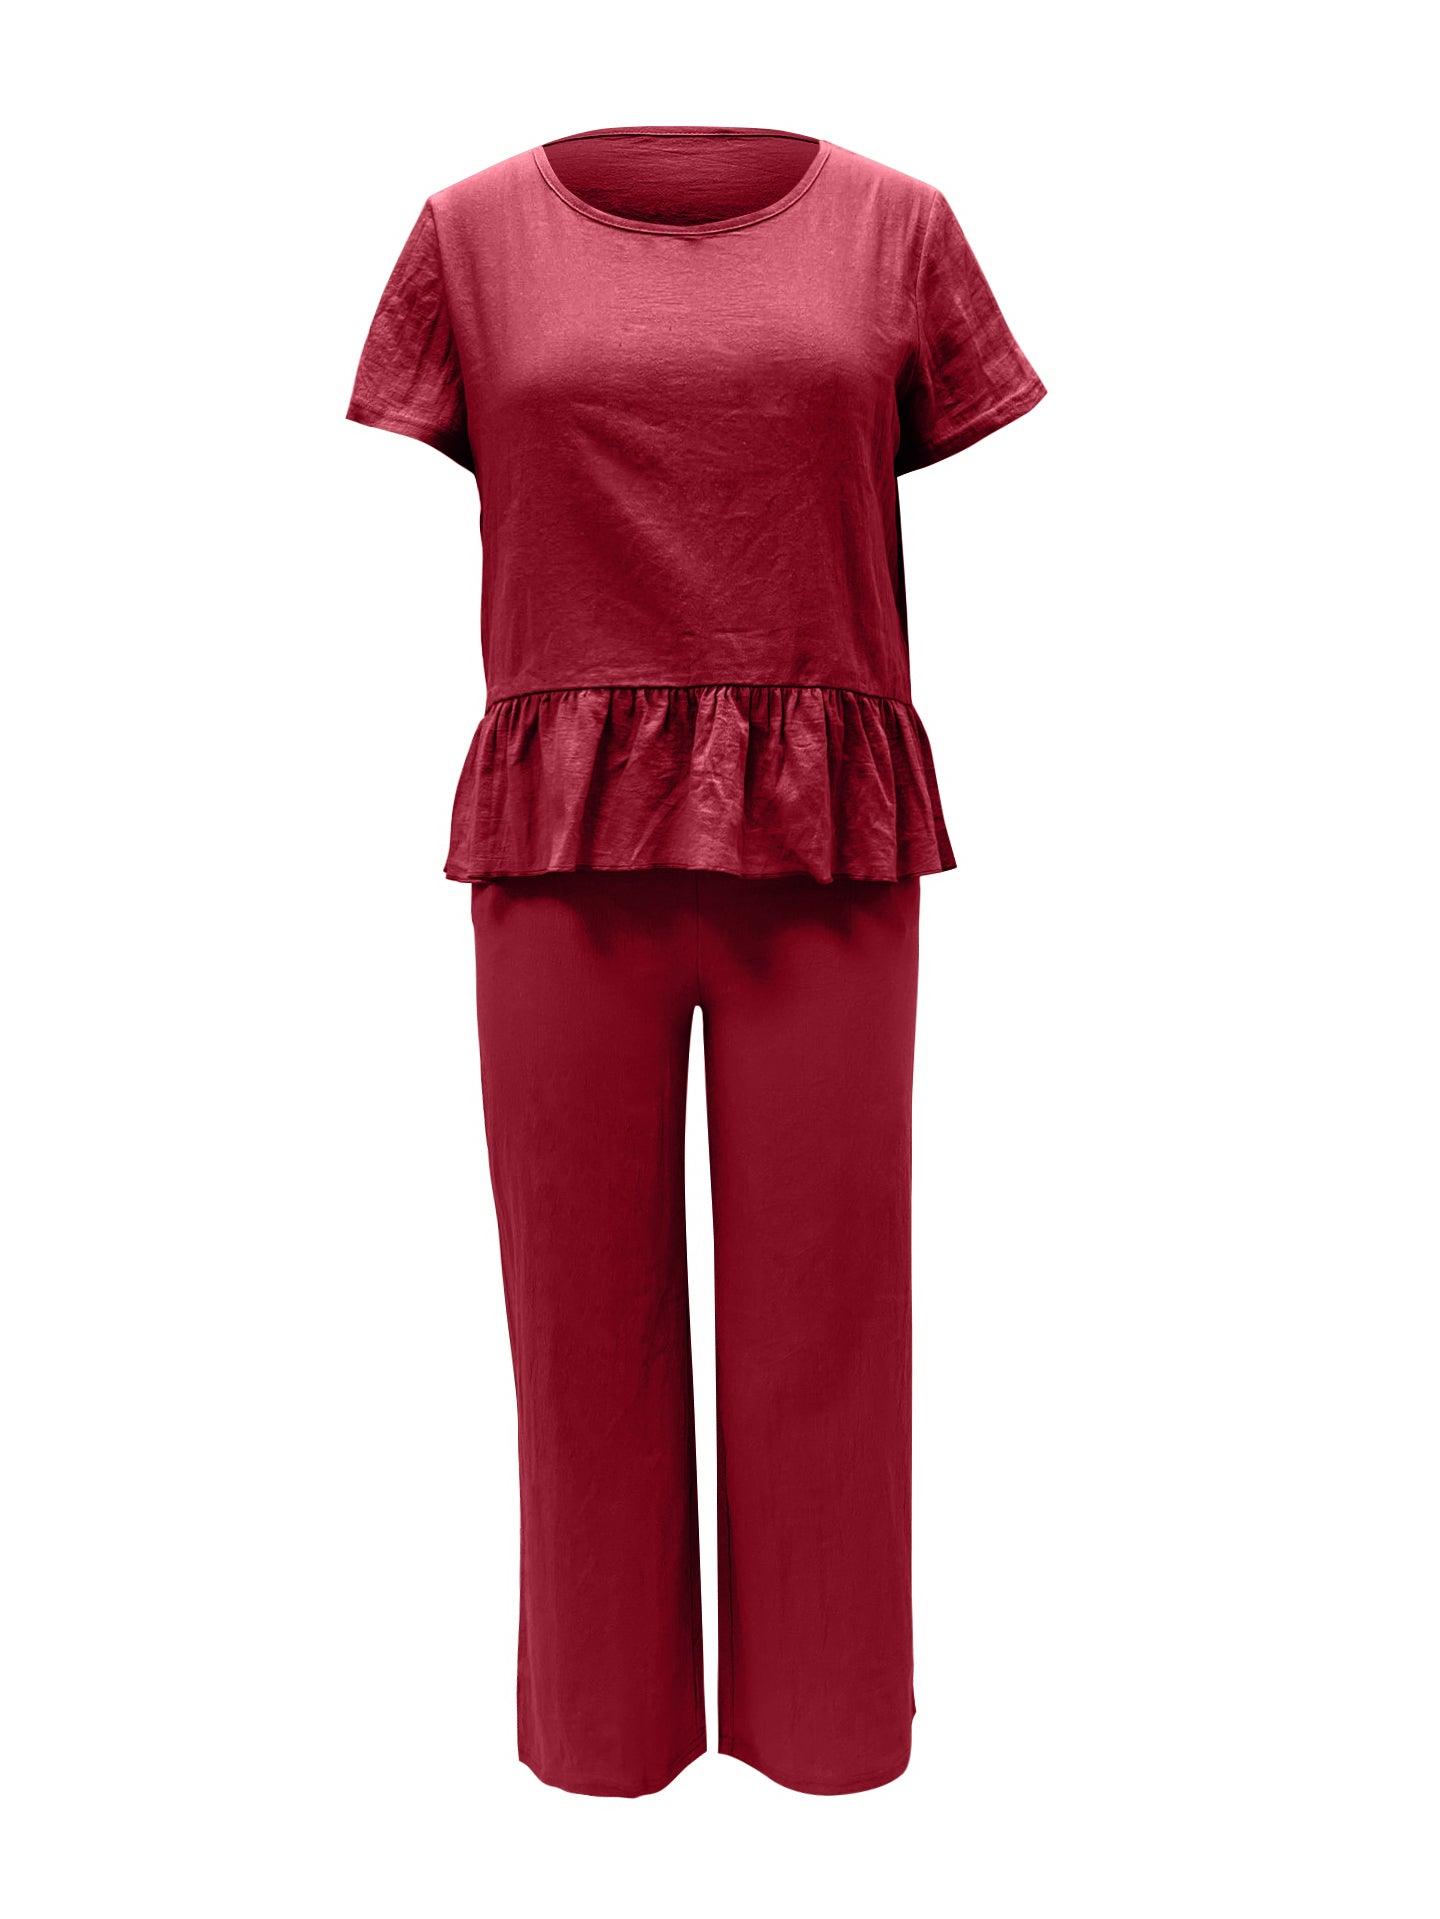 a woman wearing a red top and pants